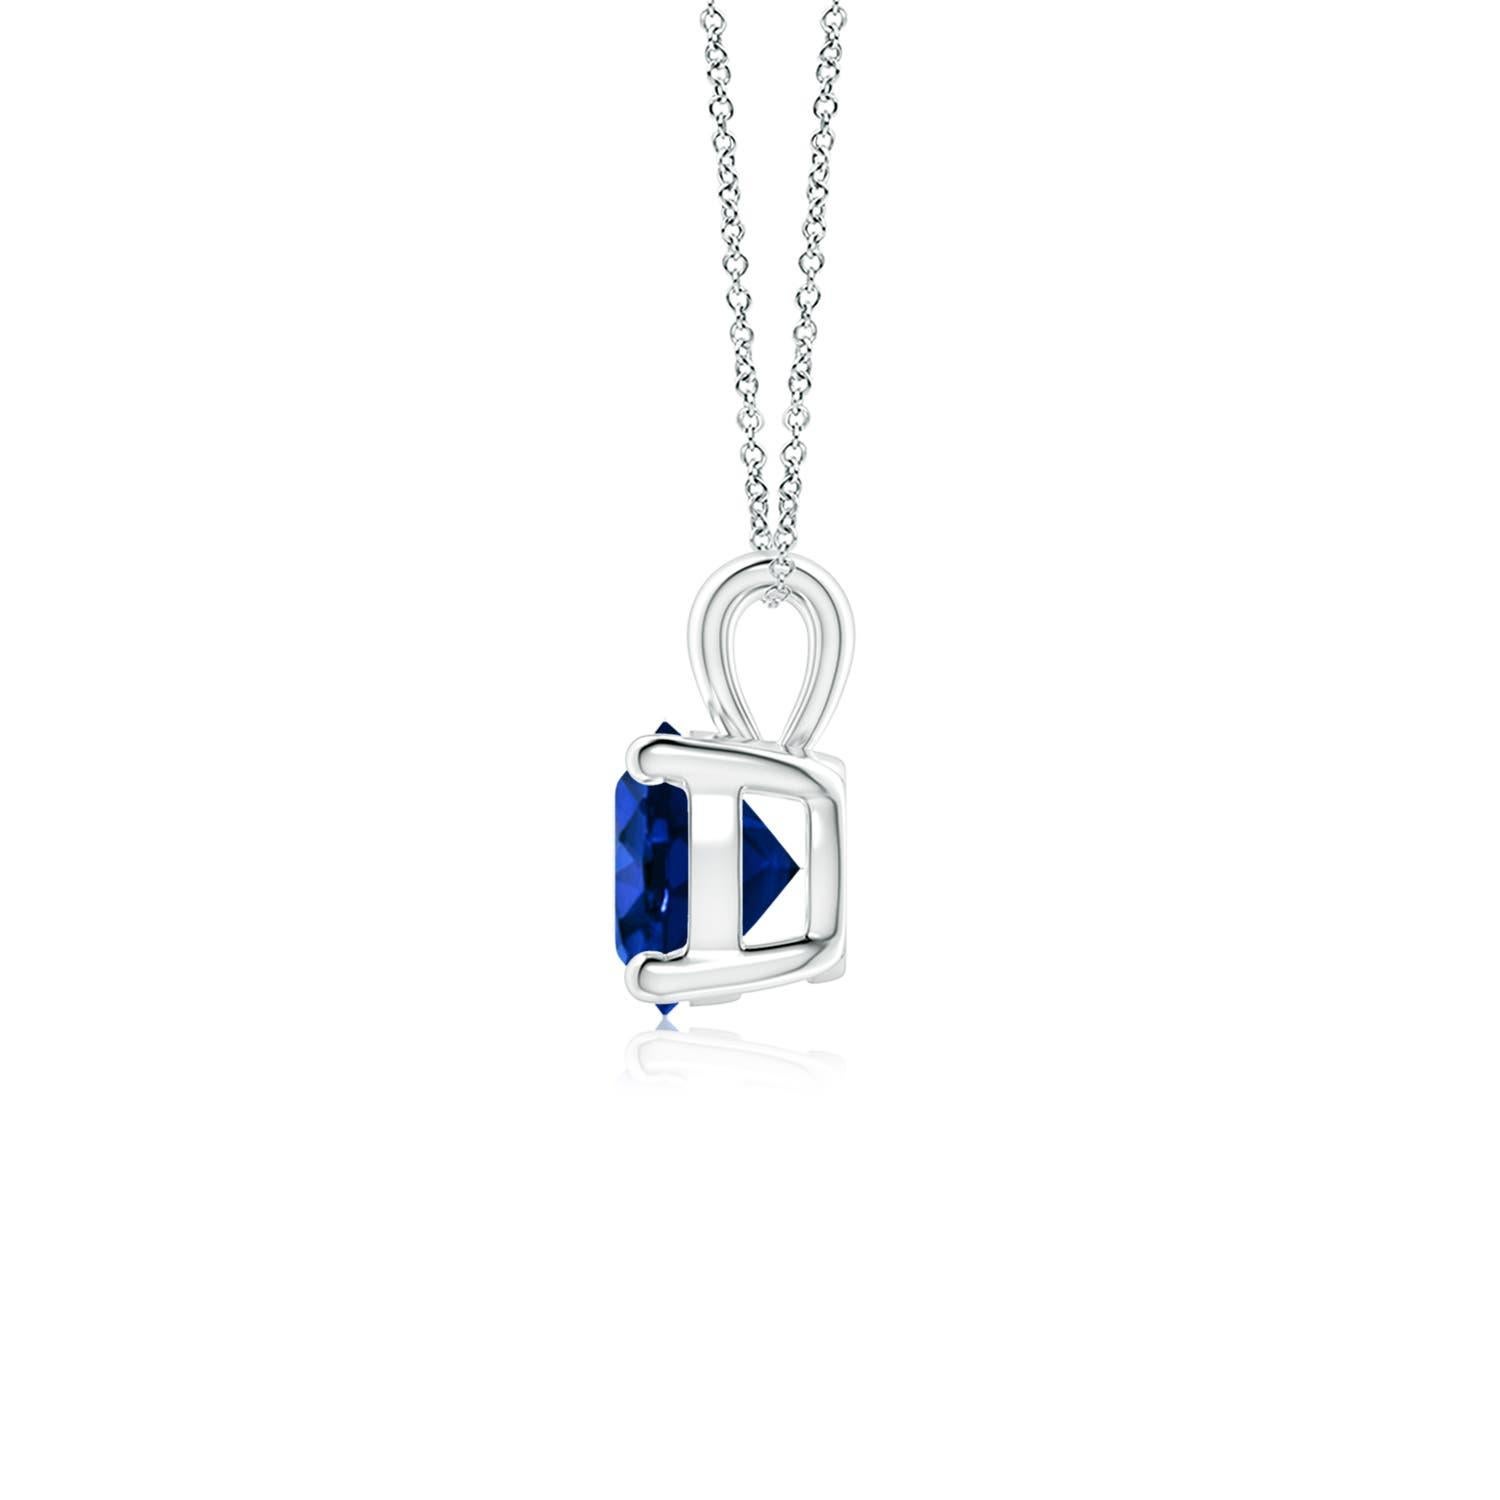 Linked to a lustrous bale is a stunning sapphire solitaire secured in a four prong setting. Crafted in 14k white gold, the elegant design of this classic sapphire pendant draws all attention towards the magnificence of the center stone.
Blue